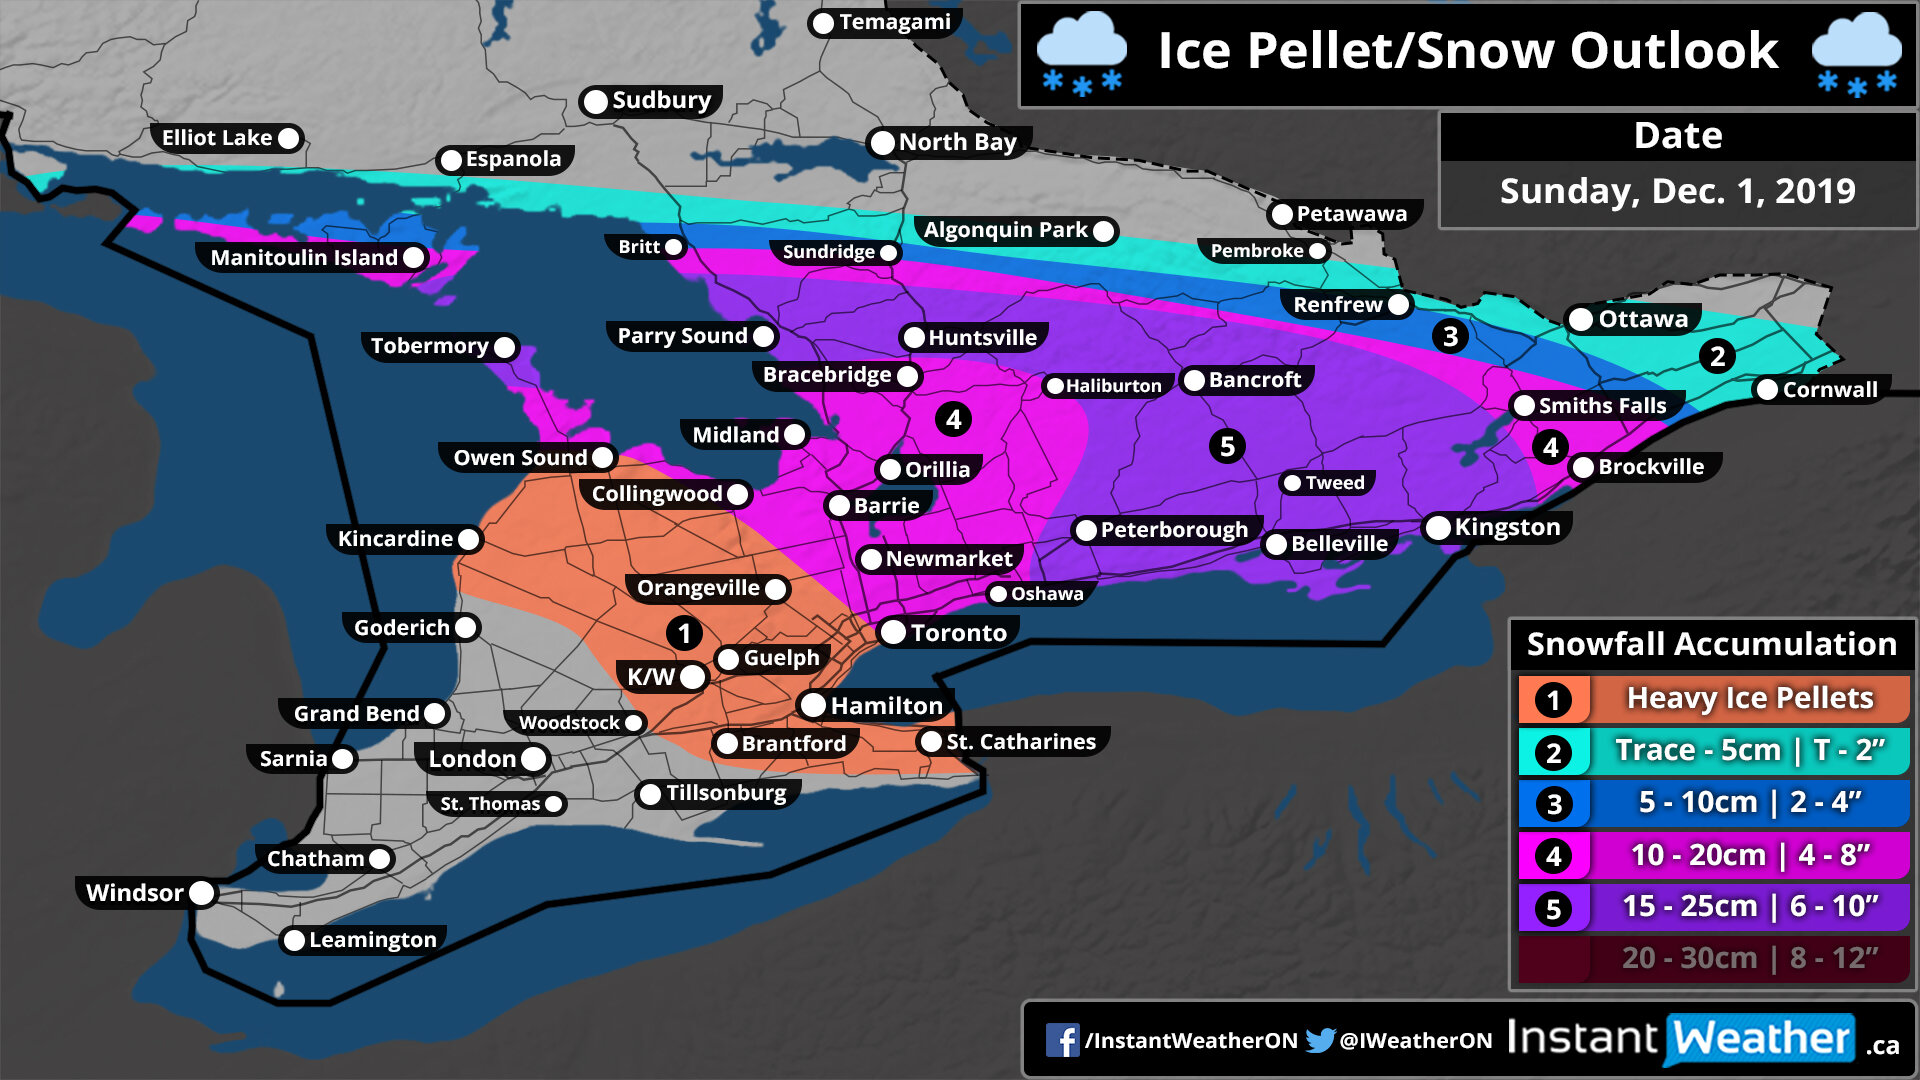 Winter Storm to Impact Ontario With Heavy Snow, Freezing Rain and